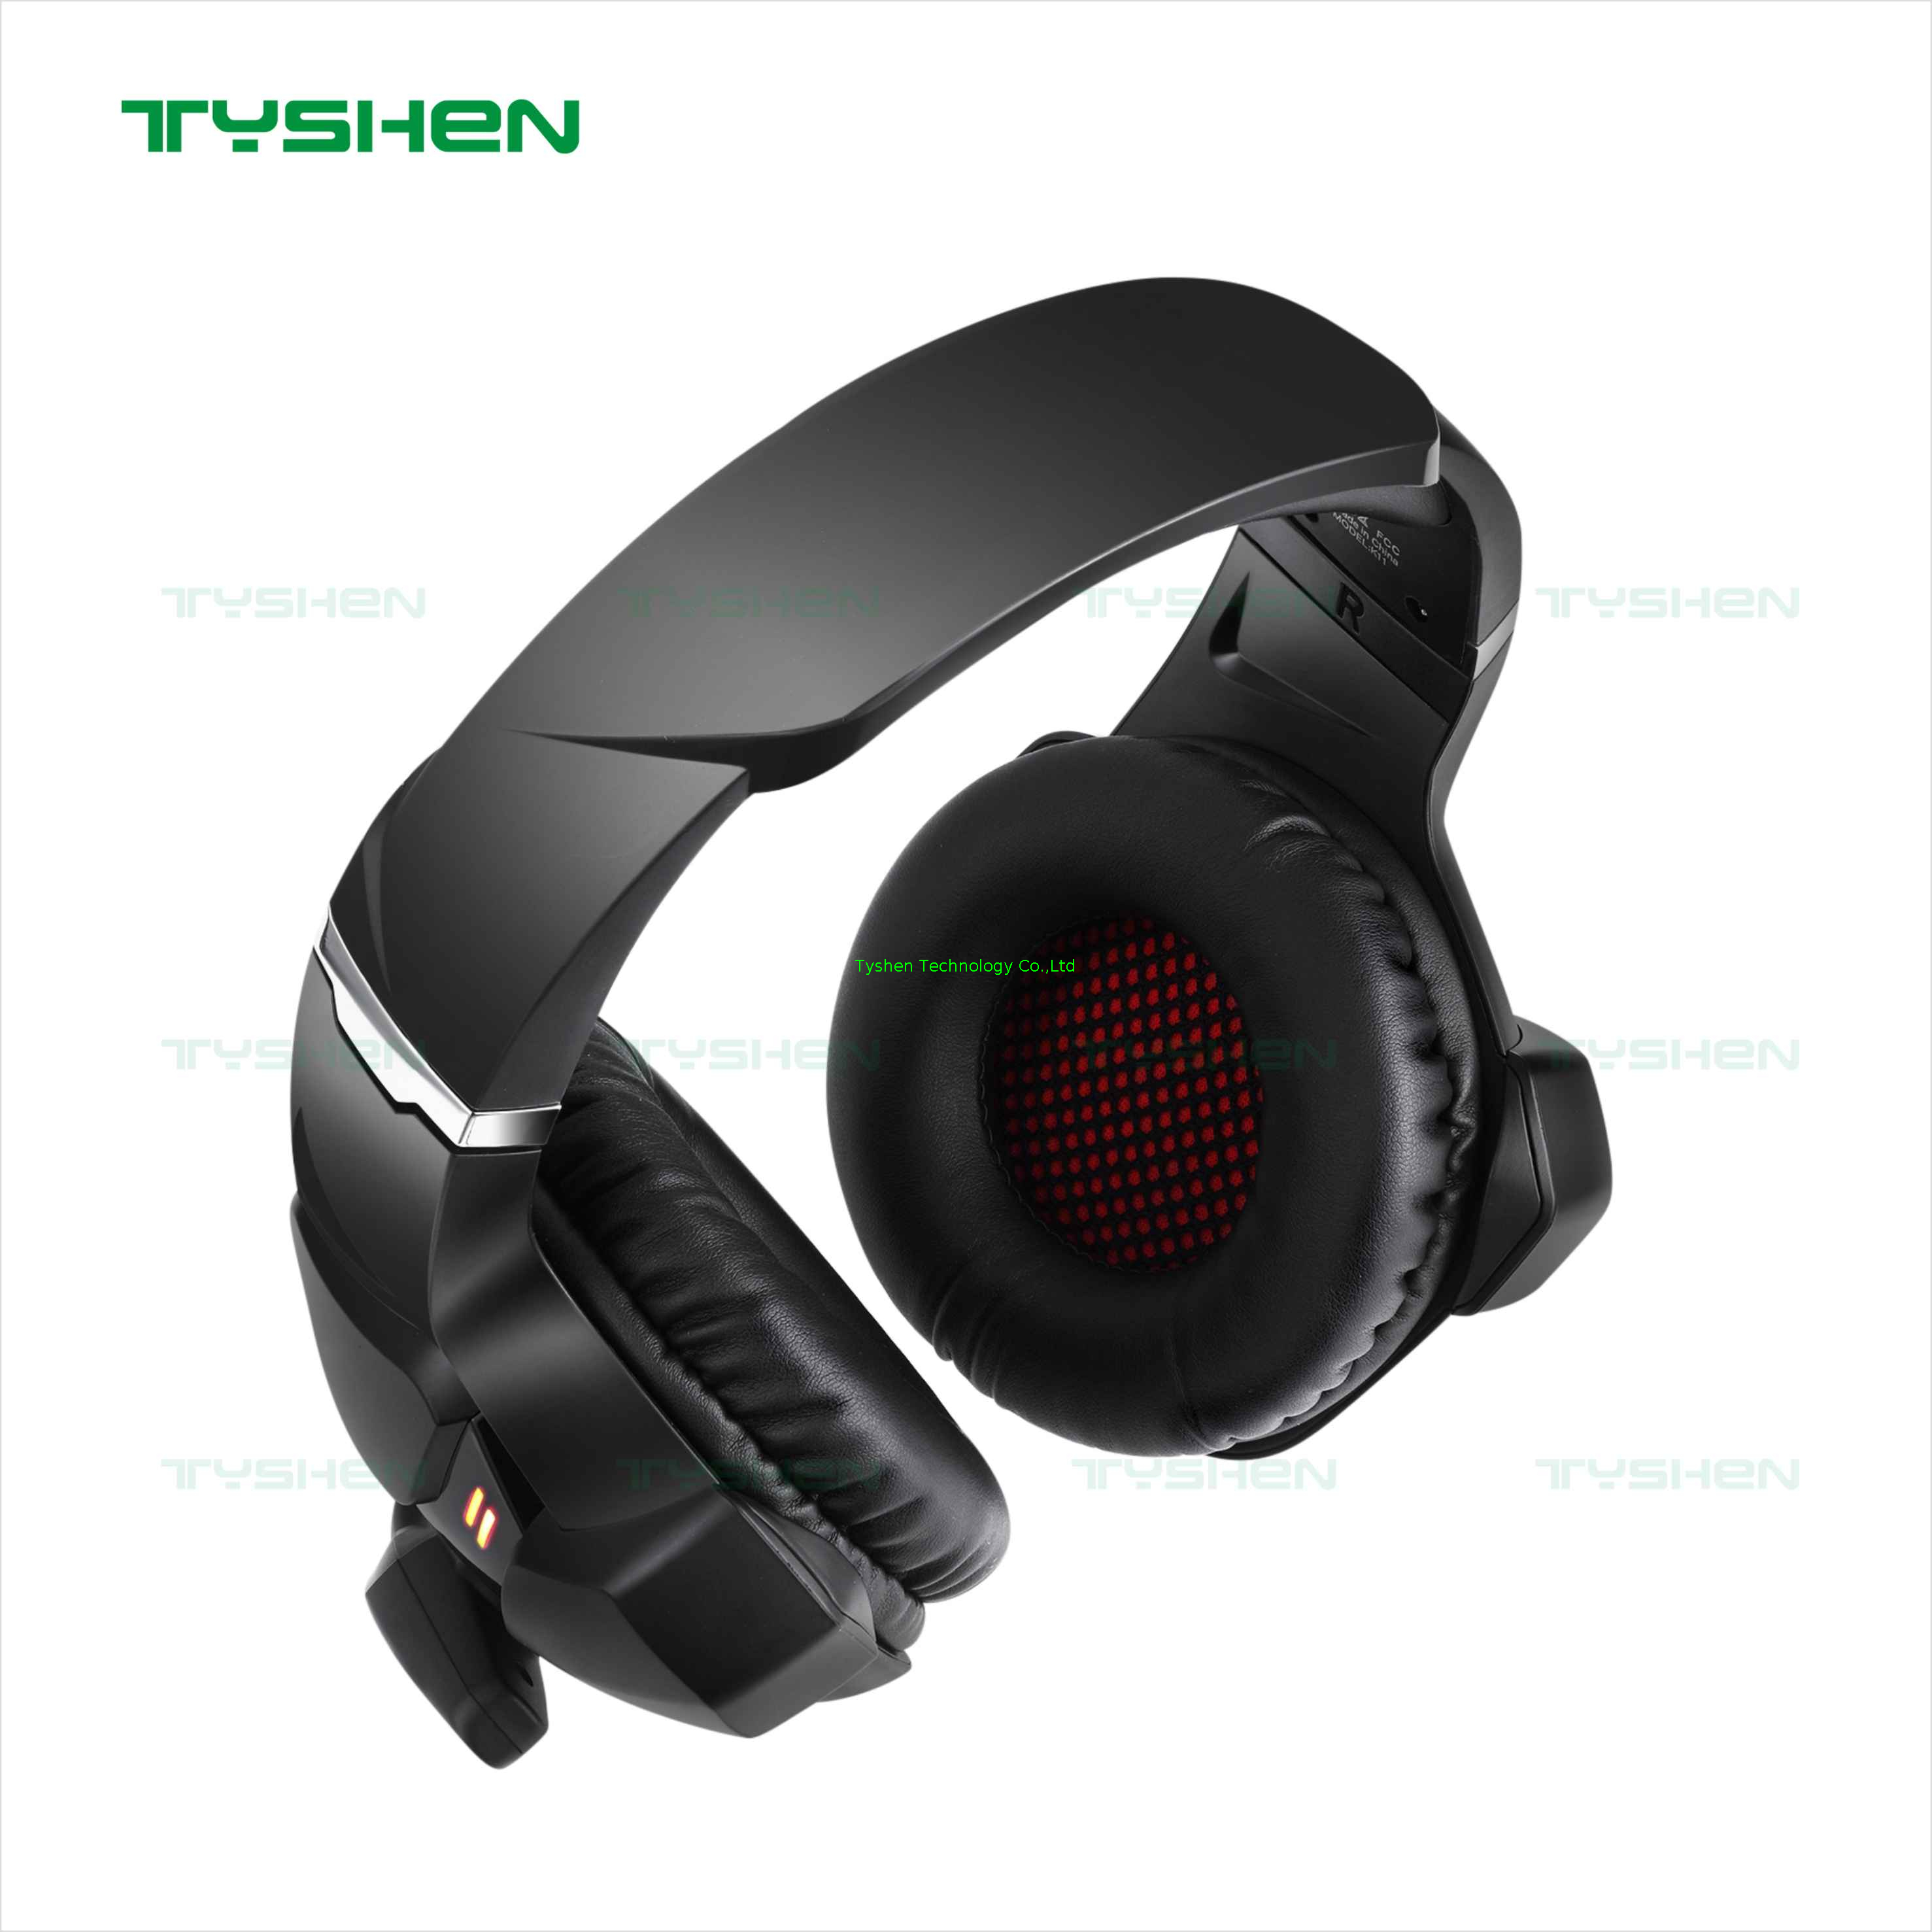 Hot Sell Computer Gaming Headset with USB and 3.5 Audio Port, RGB Lighting